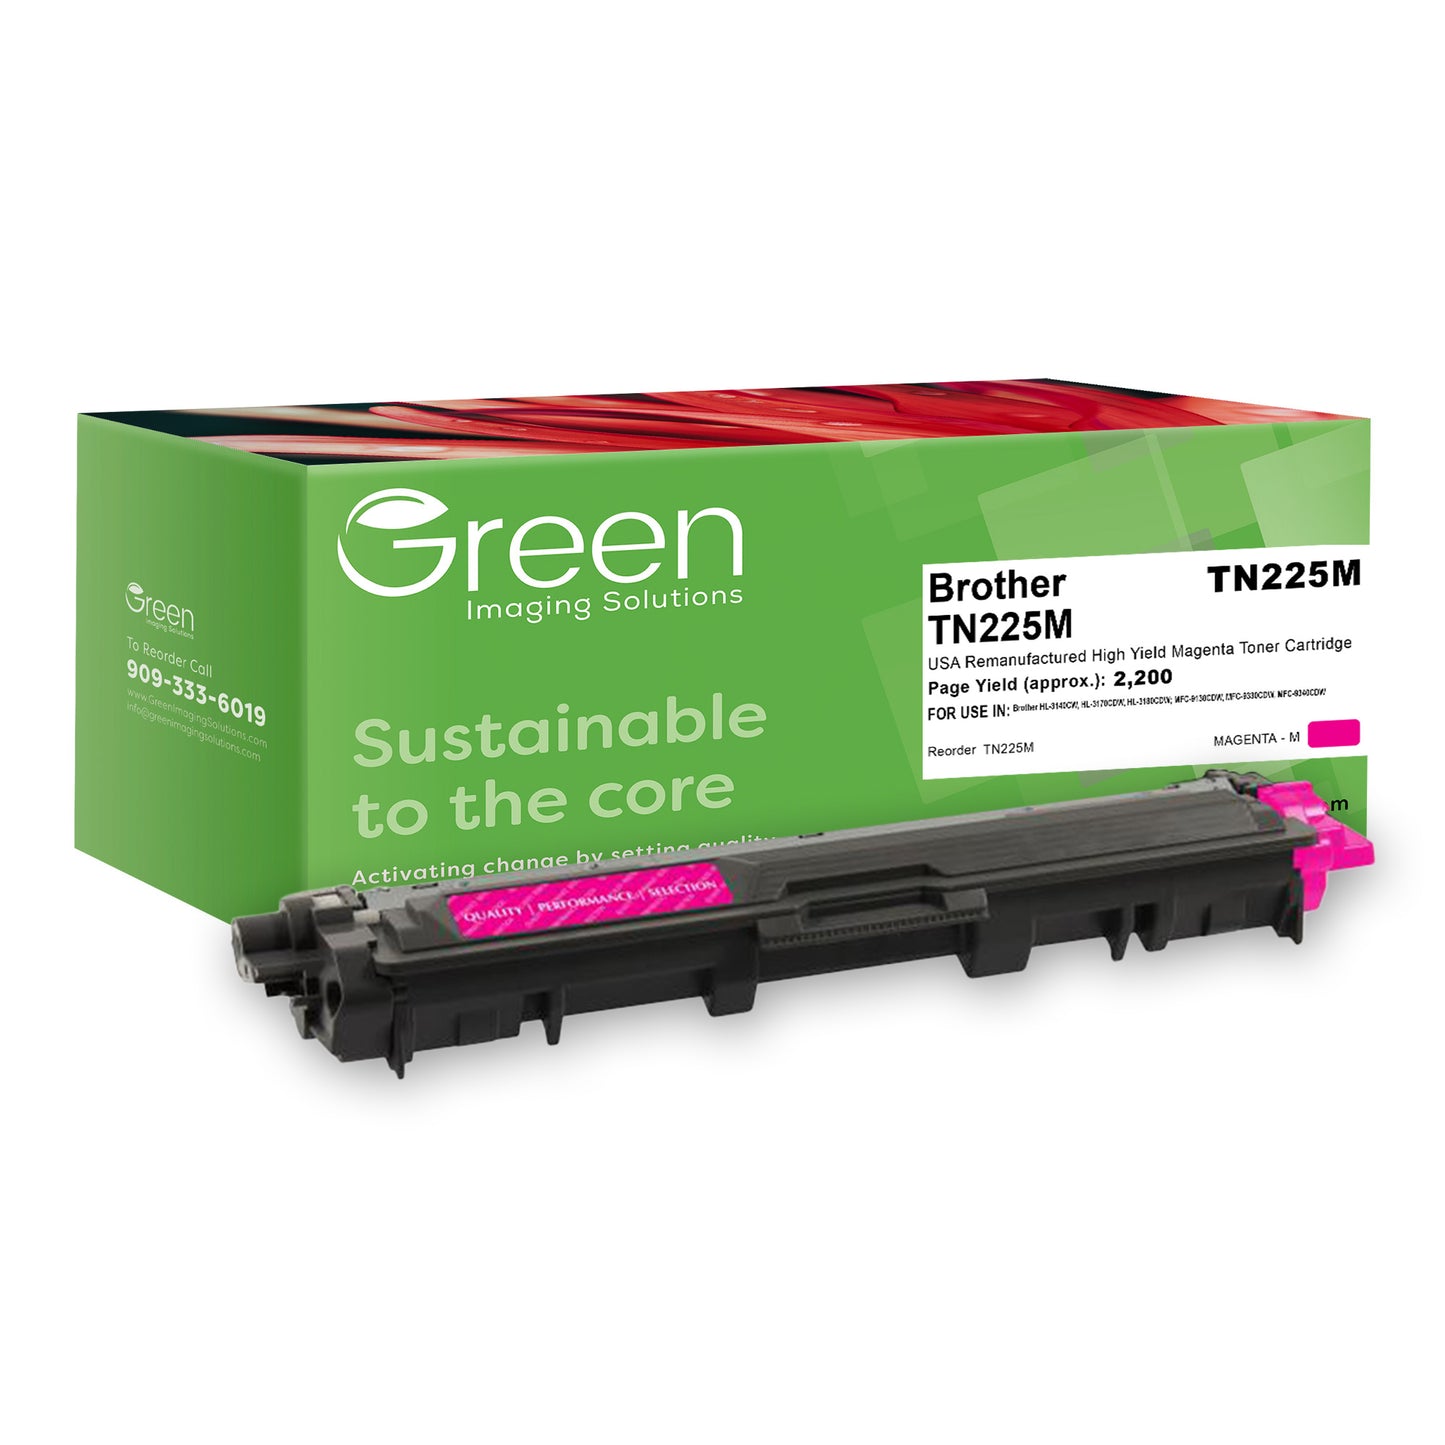 Green Imaging Solutions USA Remanufactured High Yield Magenta Toner Cartridge for Brother TN225